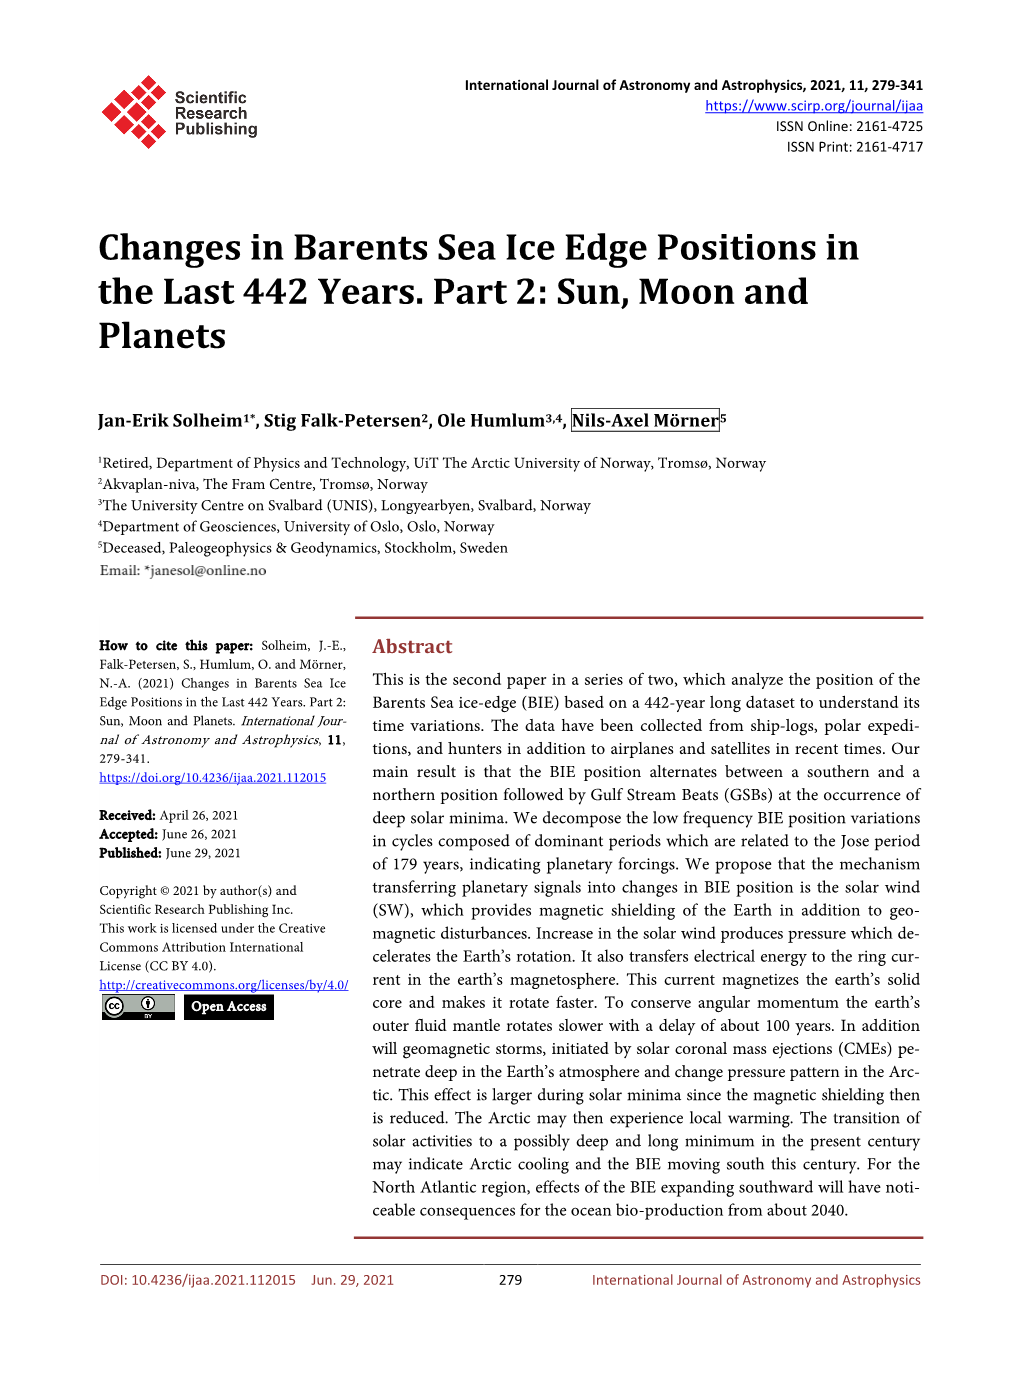 Changes in Barents Sea Ice Edge Positions in the Last 442 Years. Part 2: Sun, Moon and Planets